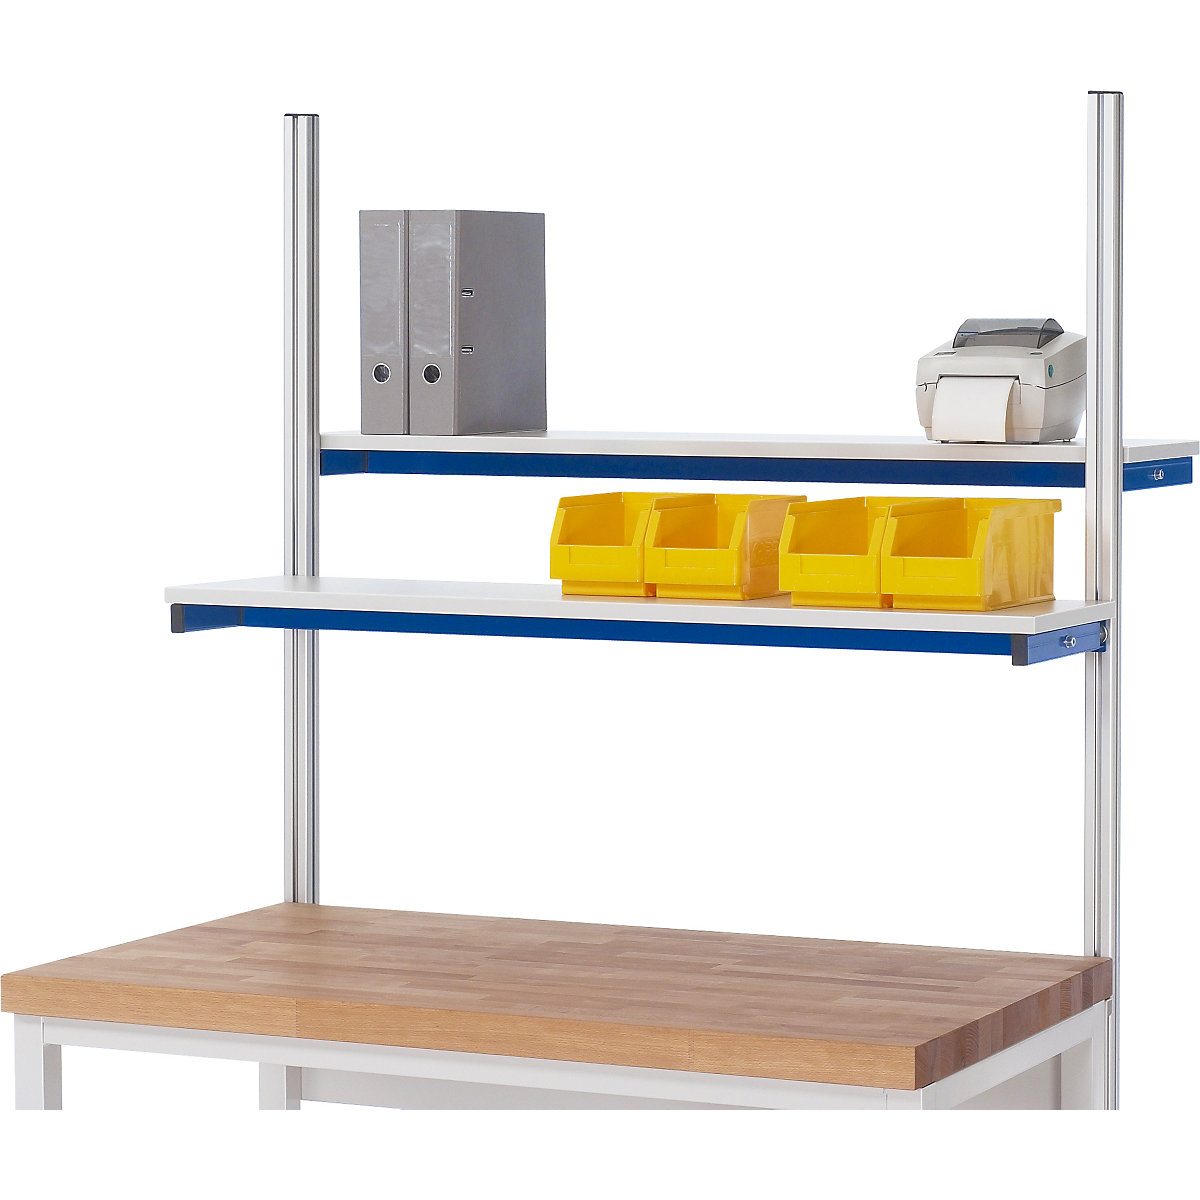 Add-on shelf – RAU, for modular add-on systems for RAU work tables and workbenches, for bay width 1250 mm-1